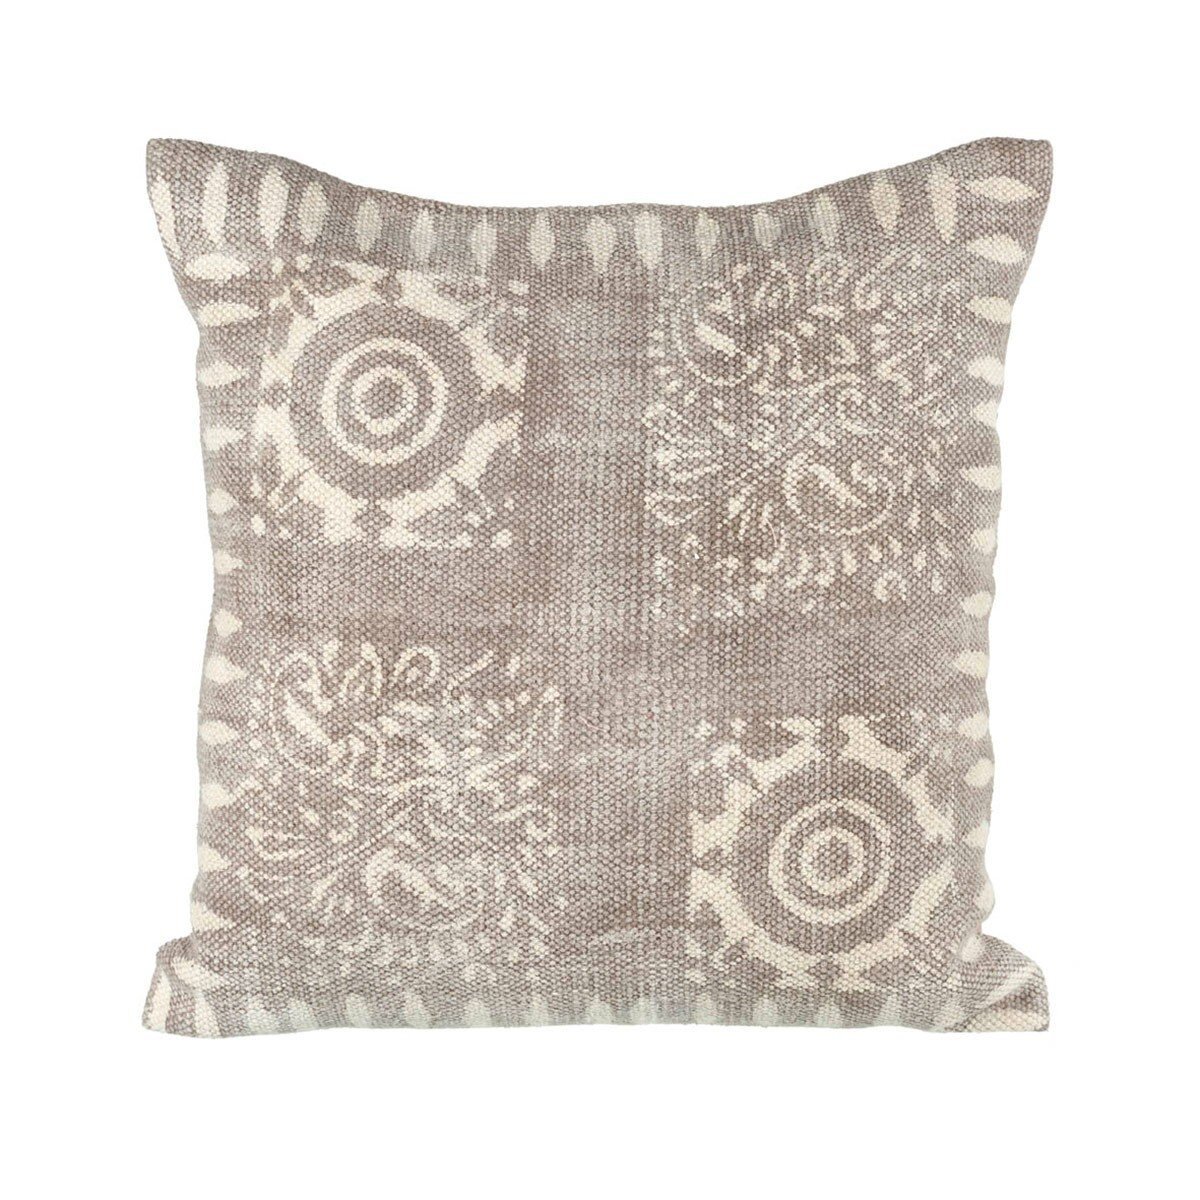 Tapestry-patterned-cushion.jpg